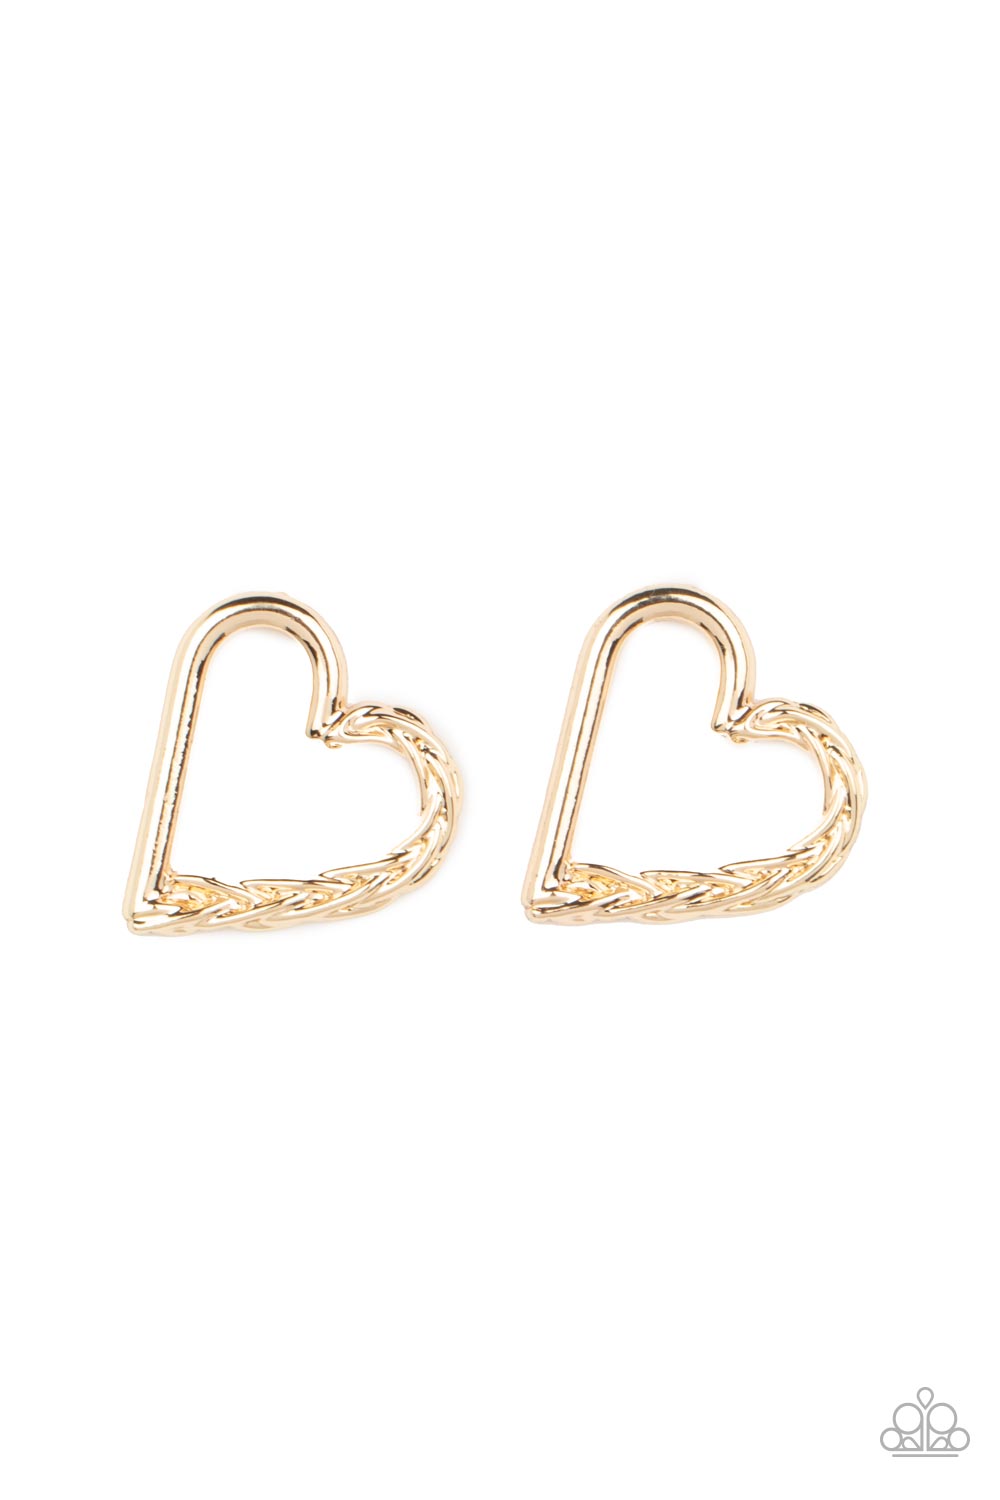 Paparazzi Cupid, Who? - Gold Earrings - A Finishing Touch Jewelry